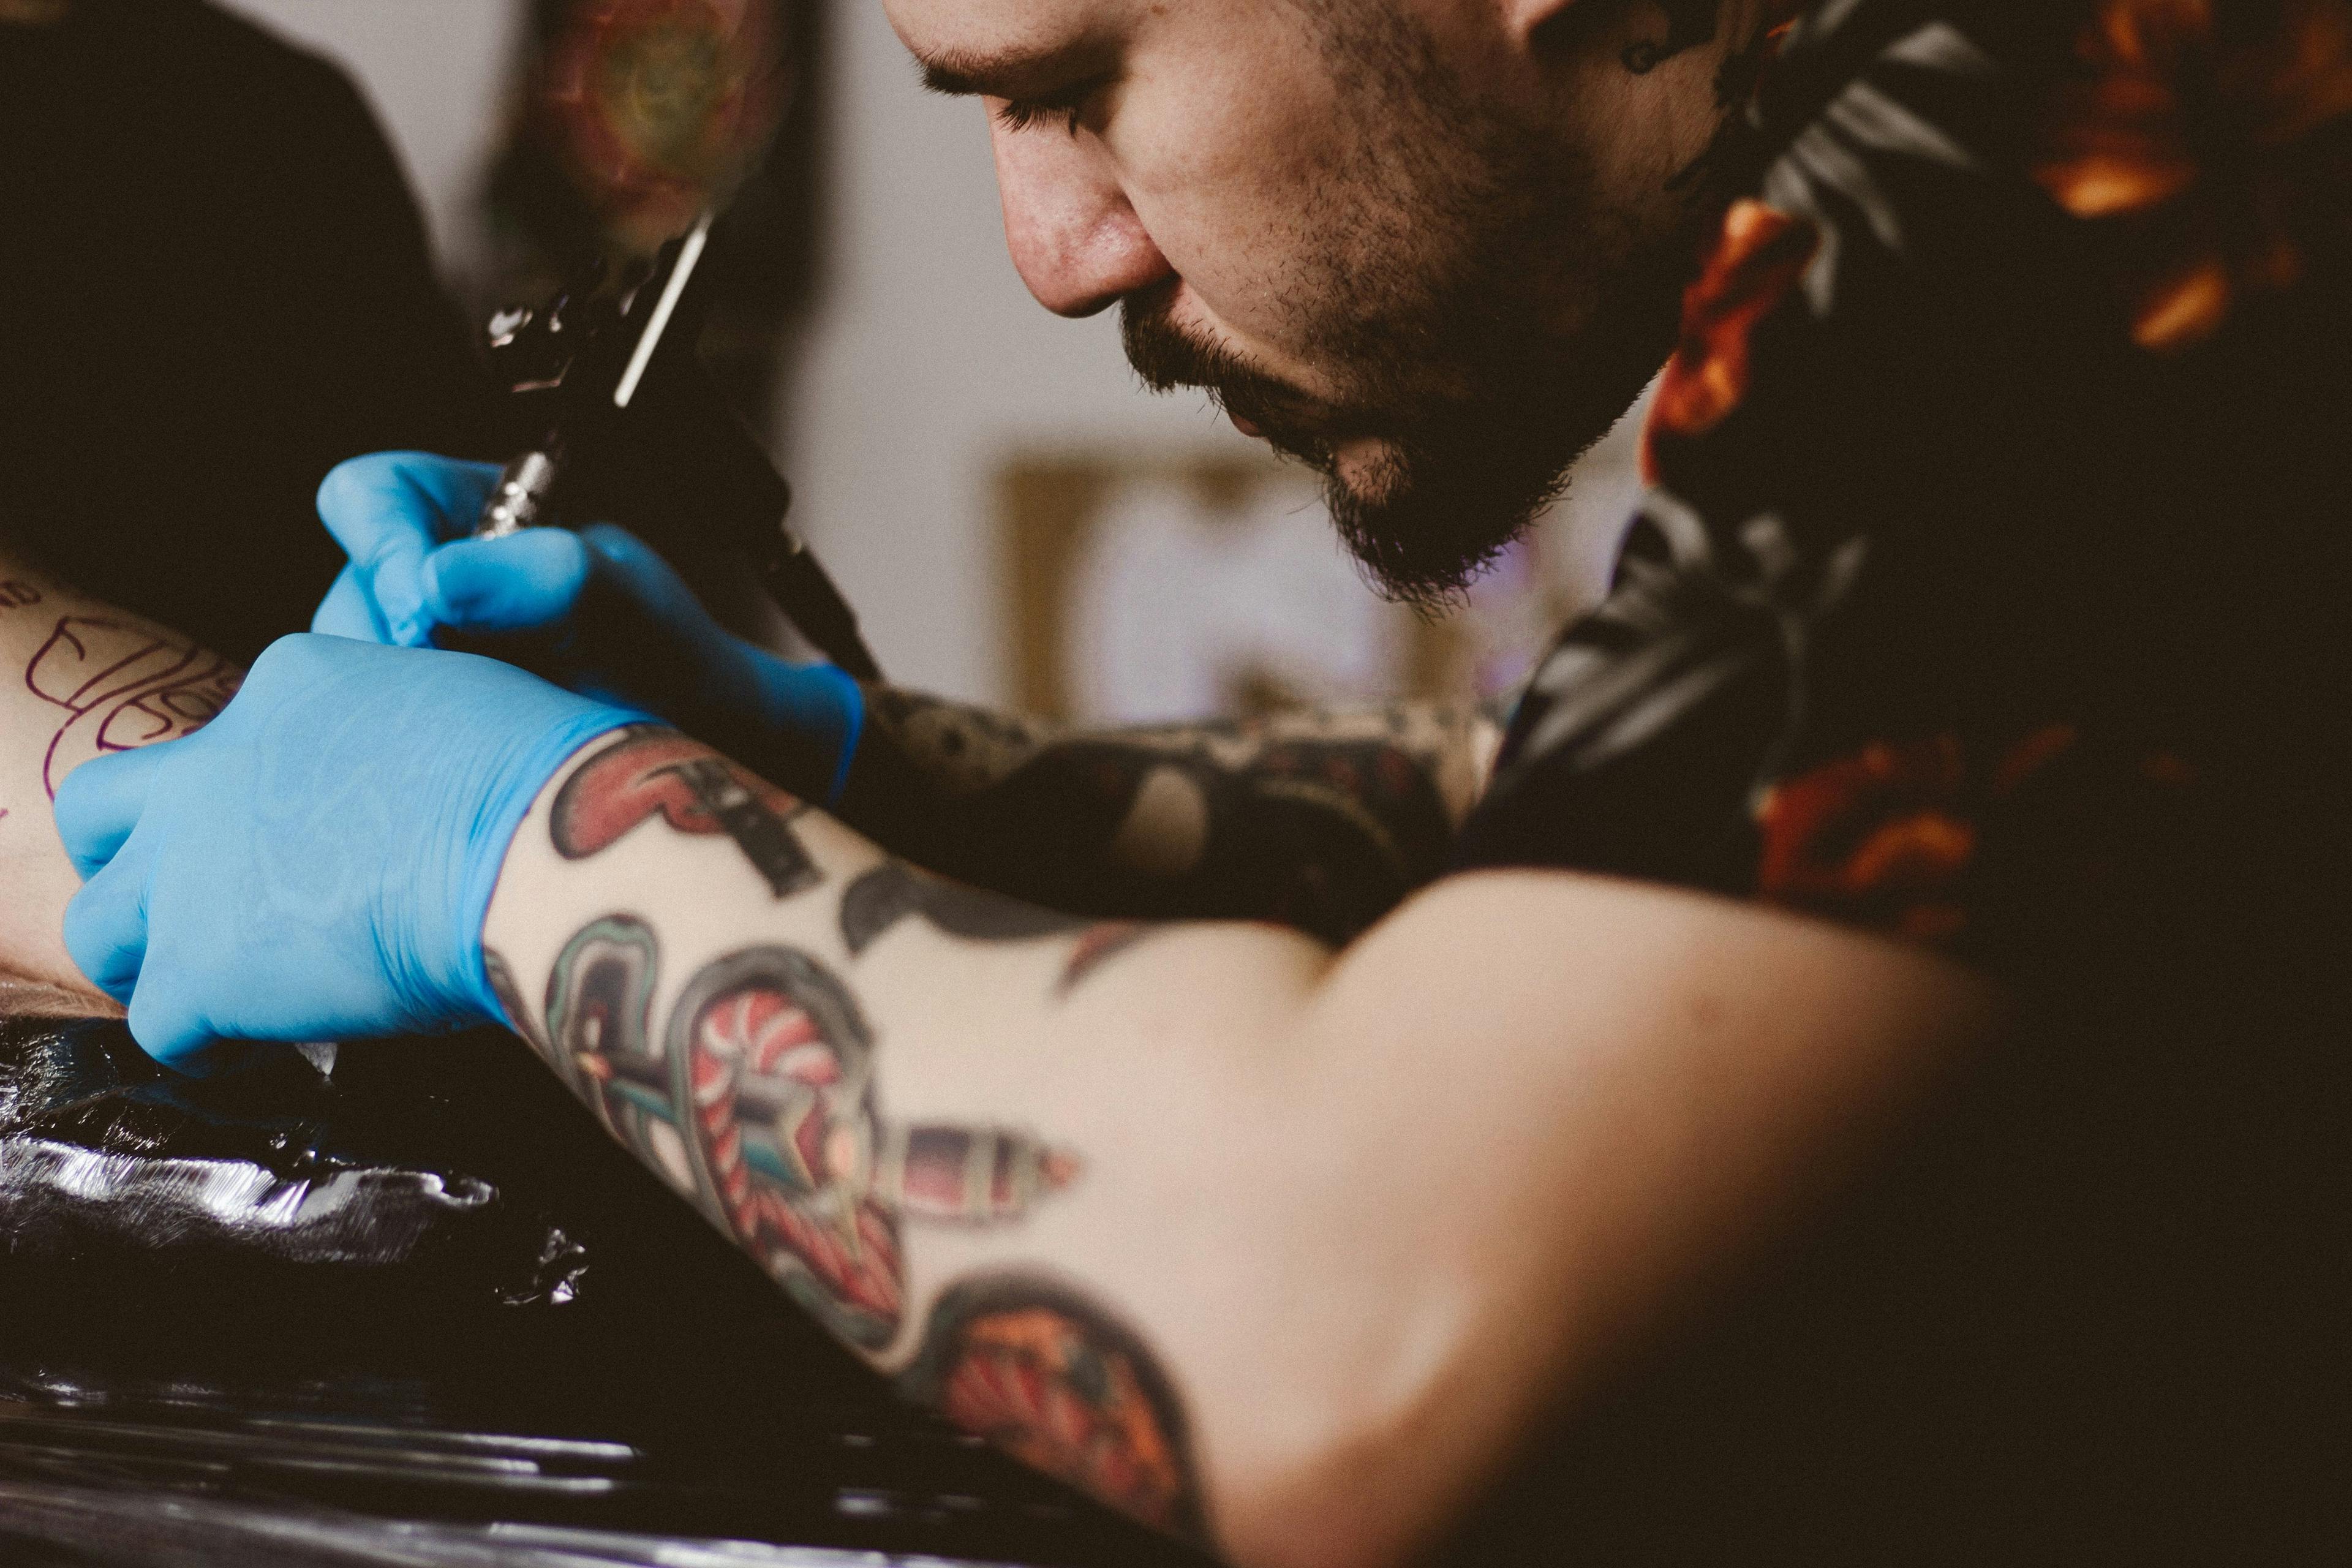 Luxembourg tattoo festival dates announced